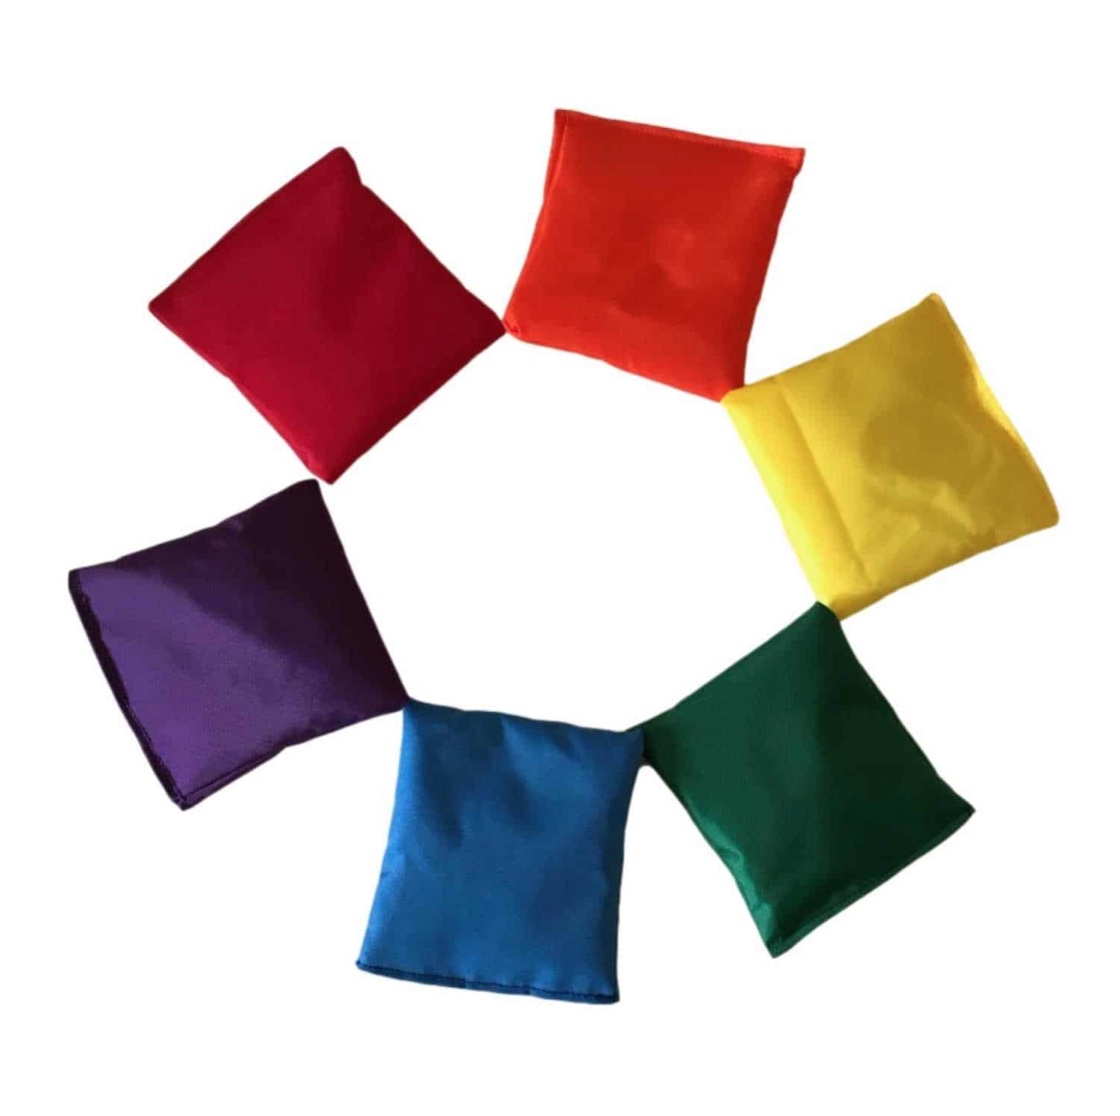 Bean Bags, wipeable (set of 6)<br>by <FONT SIZE=3><A href=http://www.madrobinmusic.com/shop/category.asp?catid=217>Bear Paw Creek</A></font>